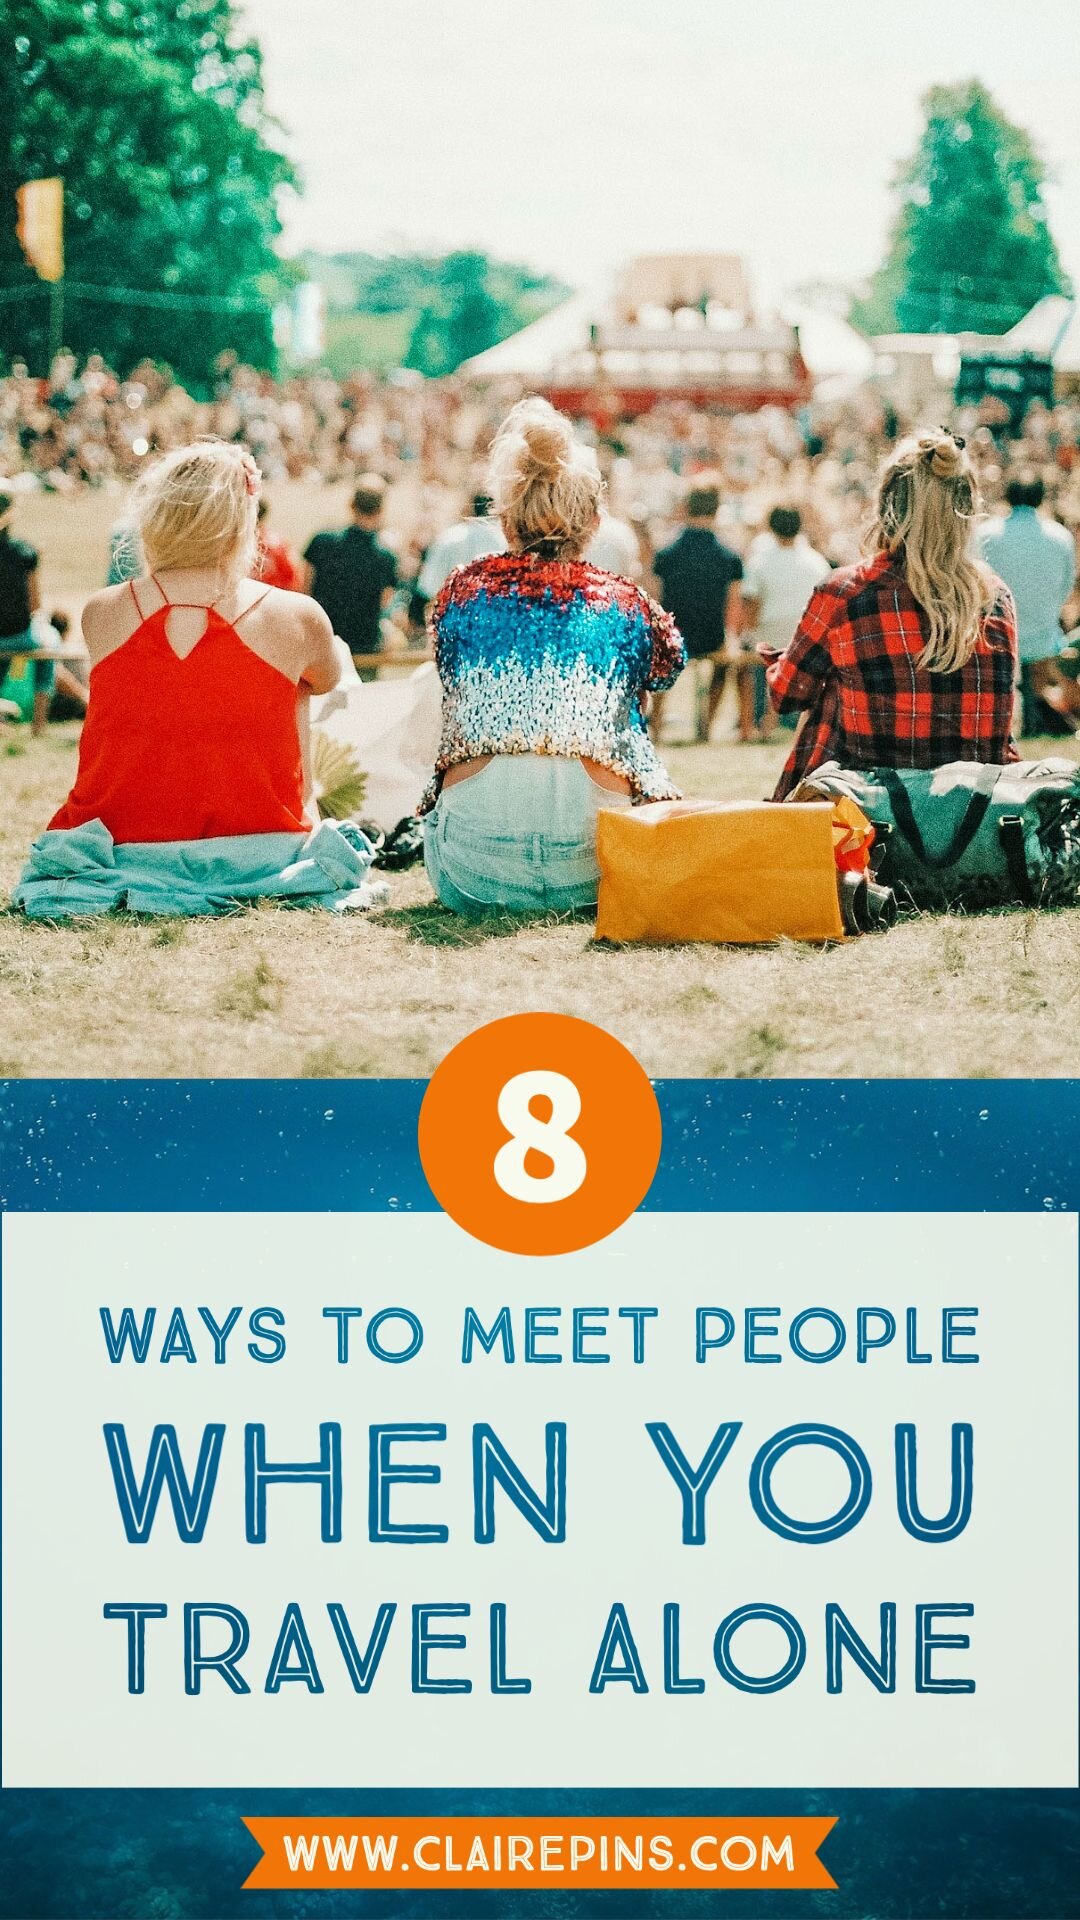 8 ways to meet people when you travel alone - how many have you tried ?.jpg